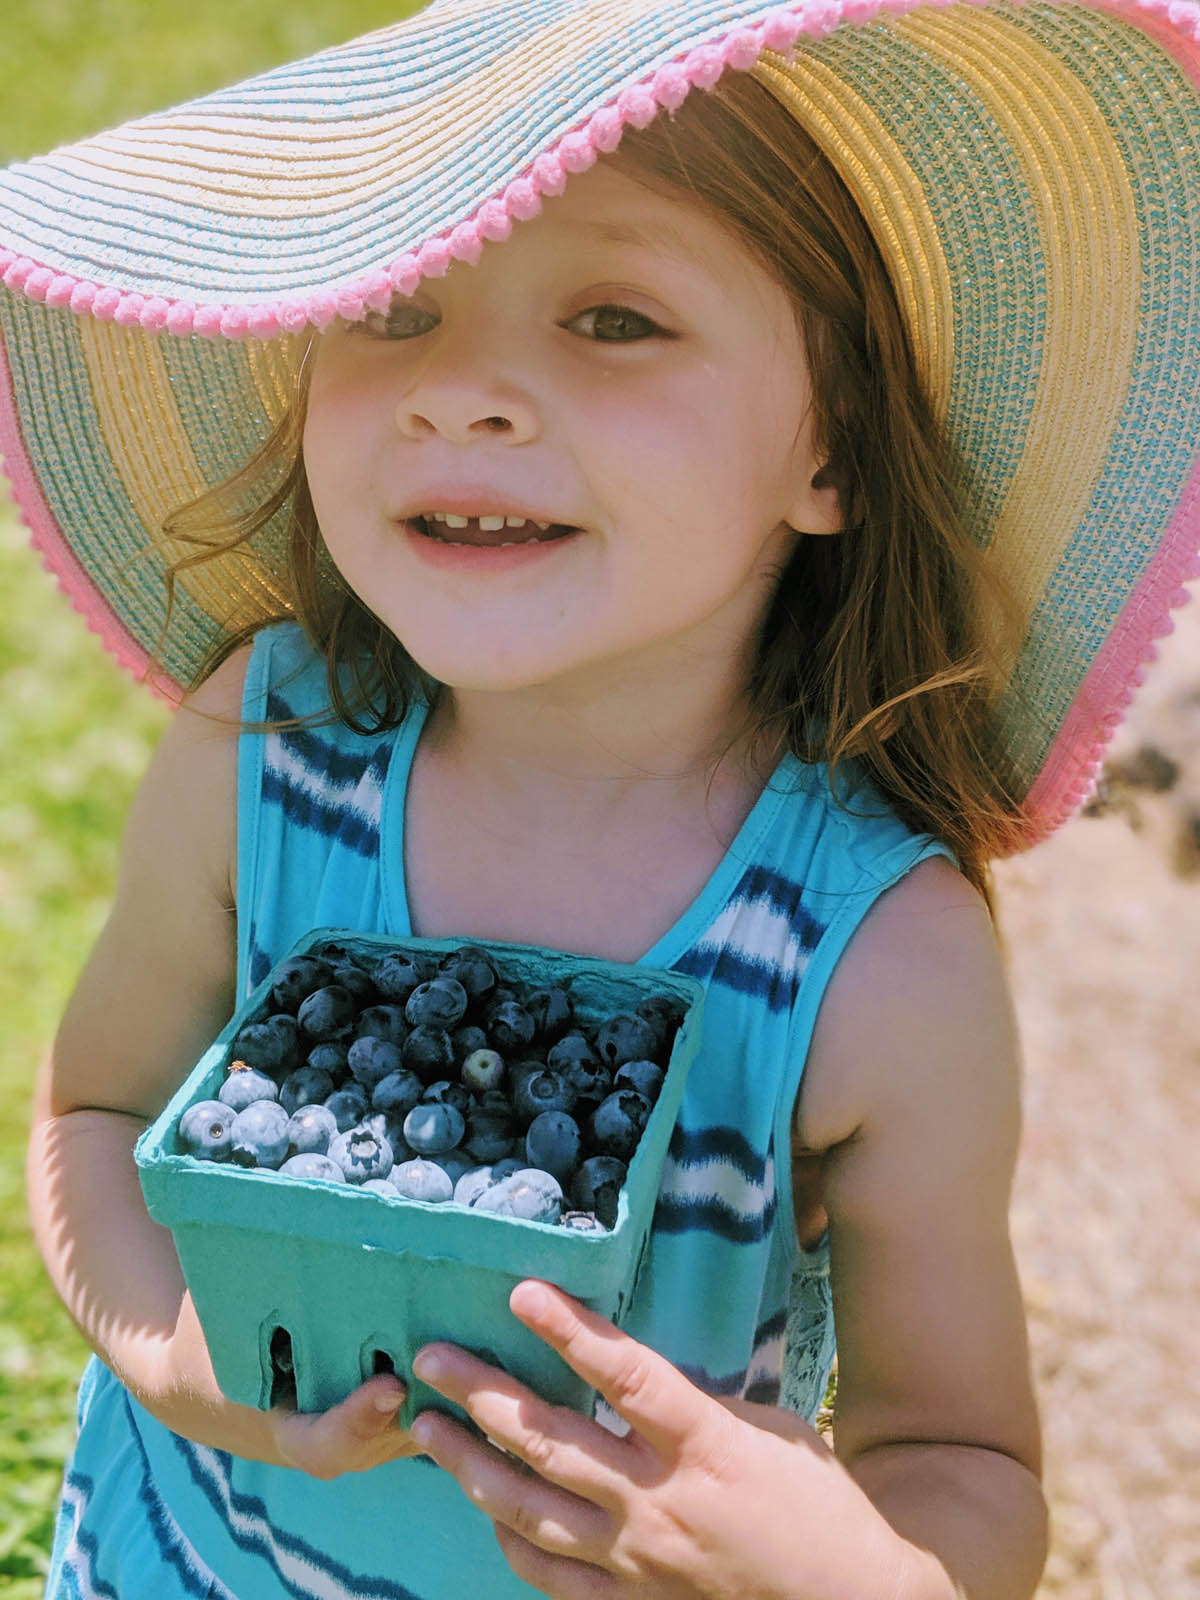 Youngest Daughter Picking Blueberries at a Farm